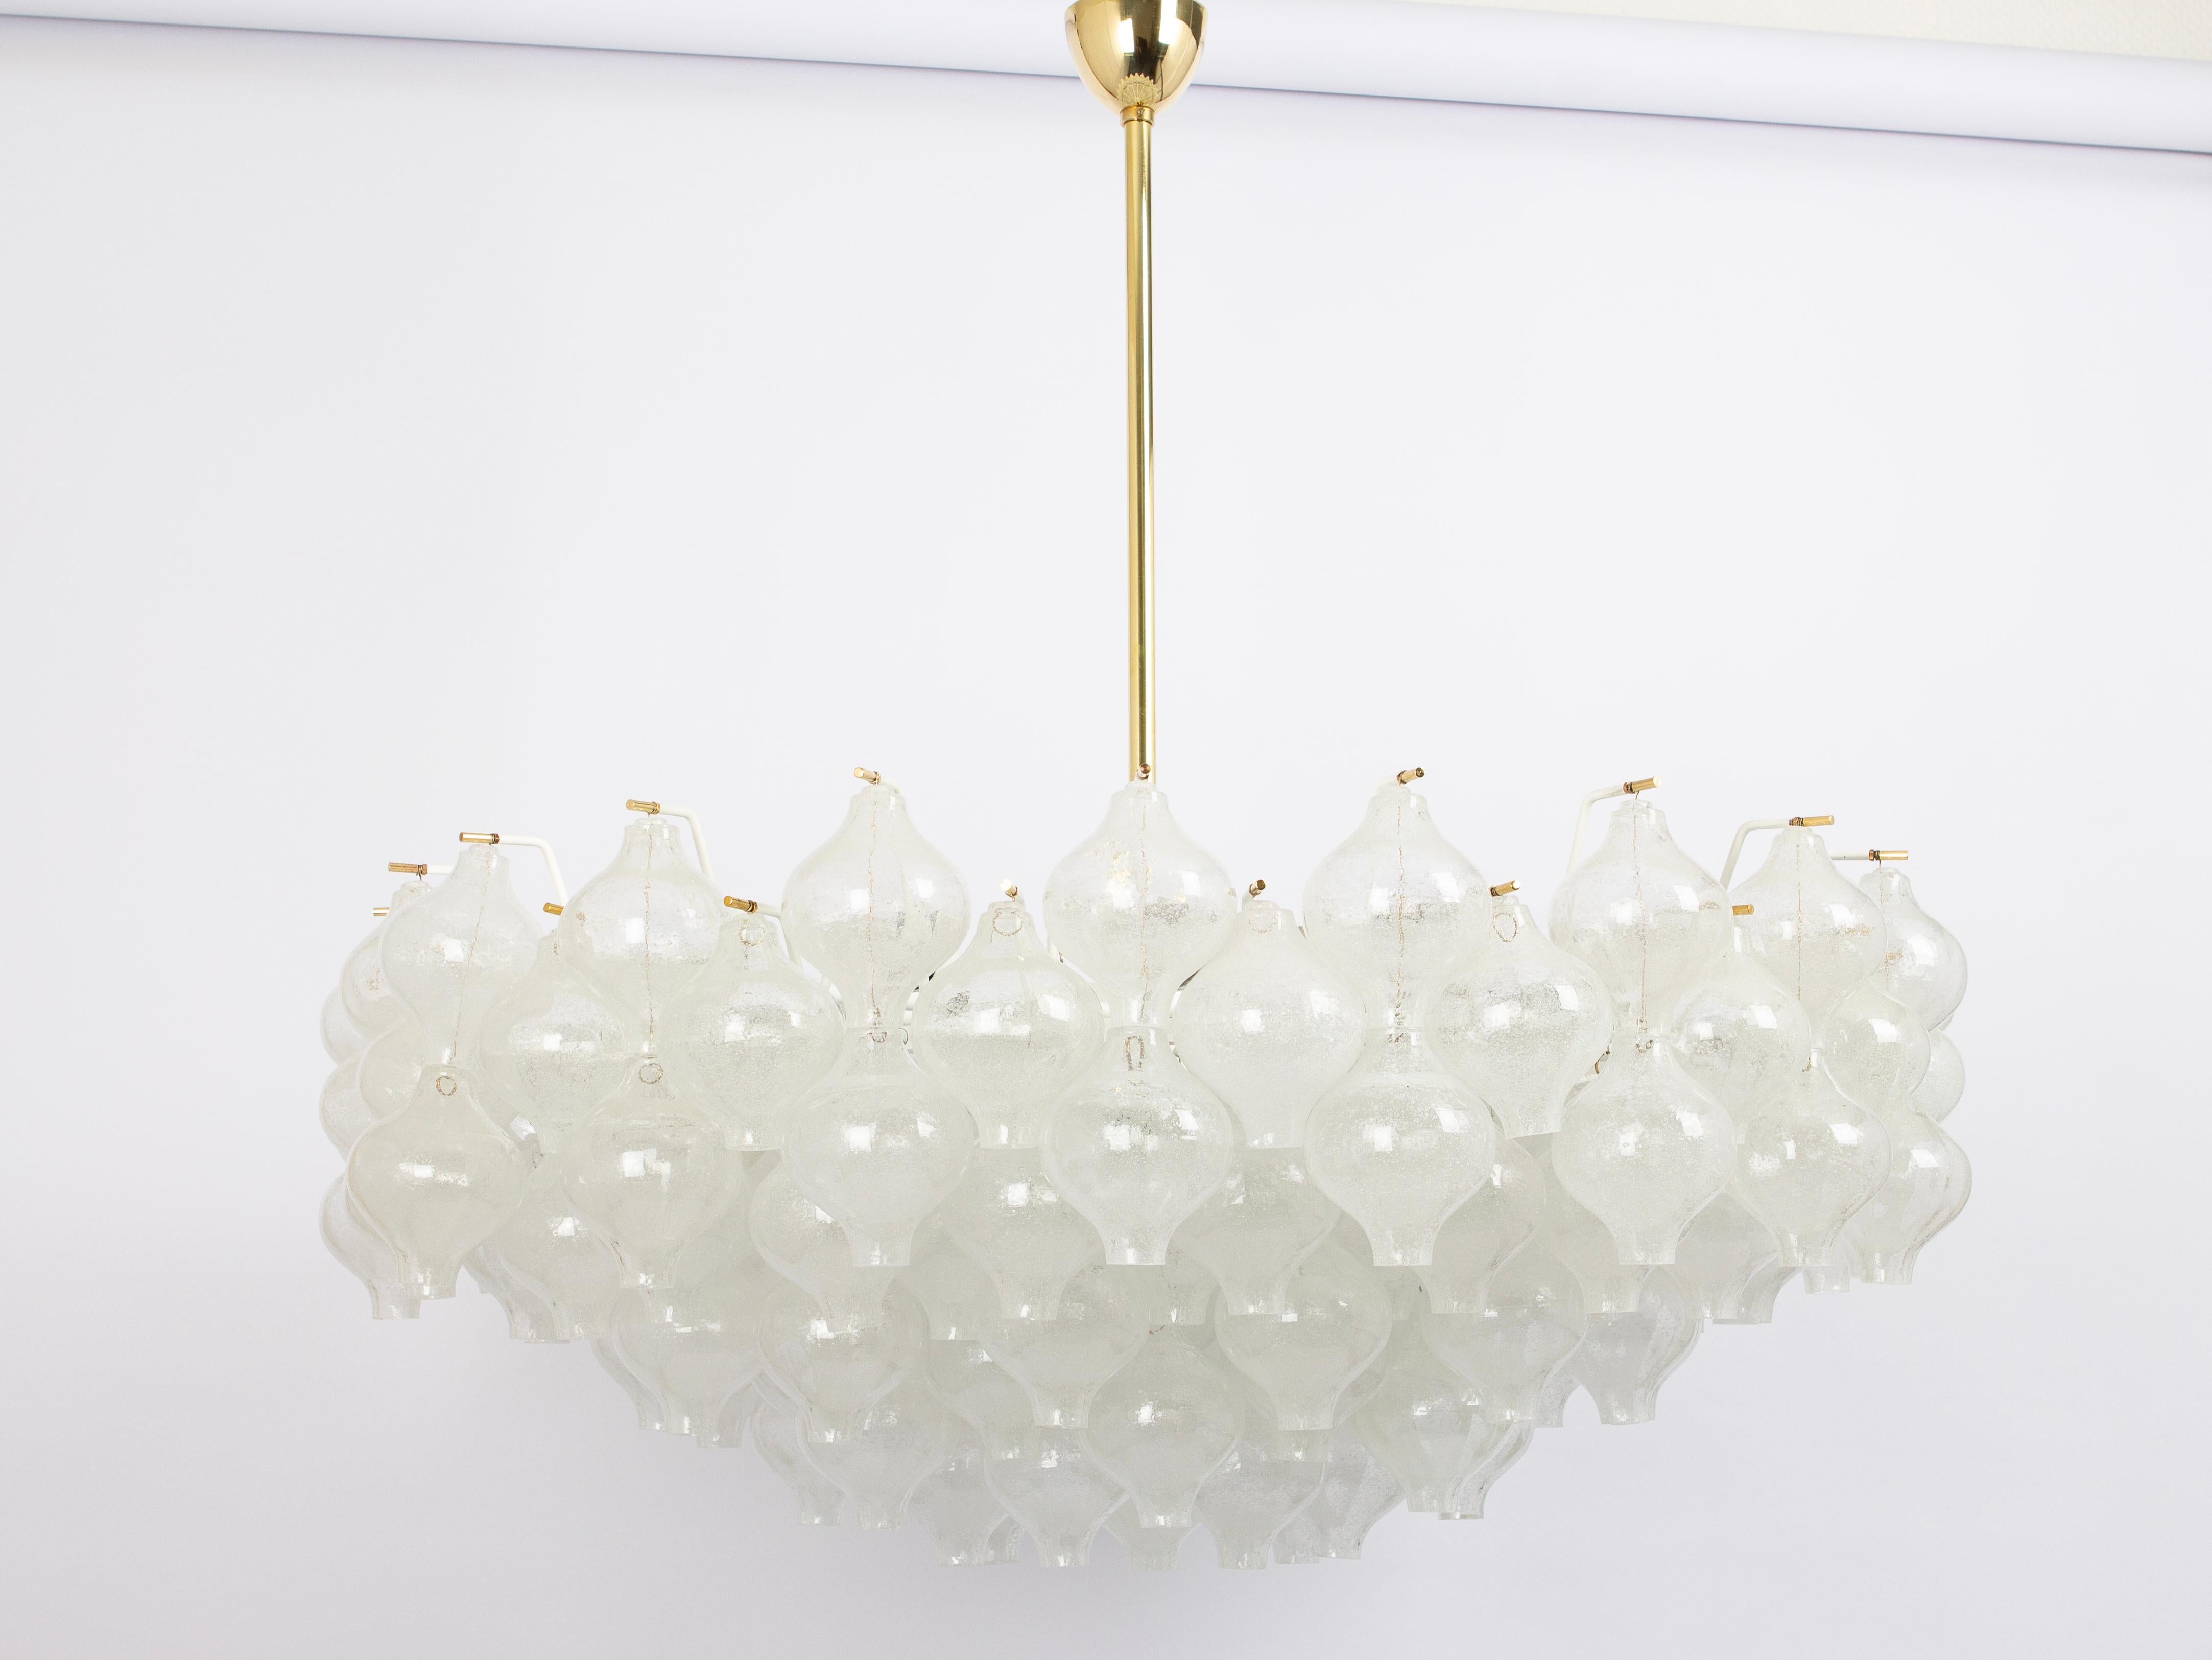 Wonderful onion-shaped -Tulipan glass chandelier. 155 hand-blown glasses suspended on a white painted metal frame.
Best of design from the 1960s by Kalmar, Austria. High quality of the materials.
The Kalmar Tulipan Chandelier is a stunning and